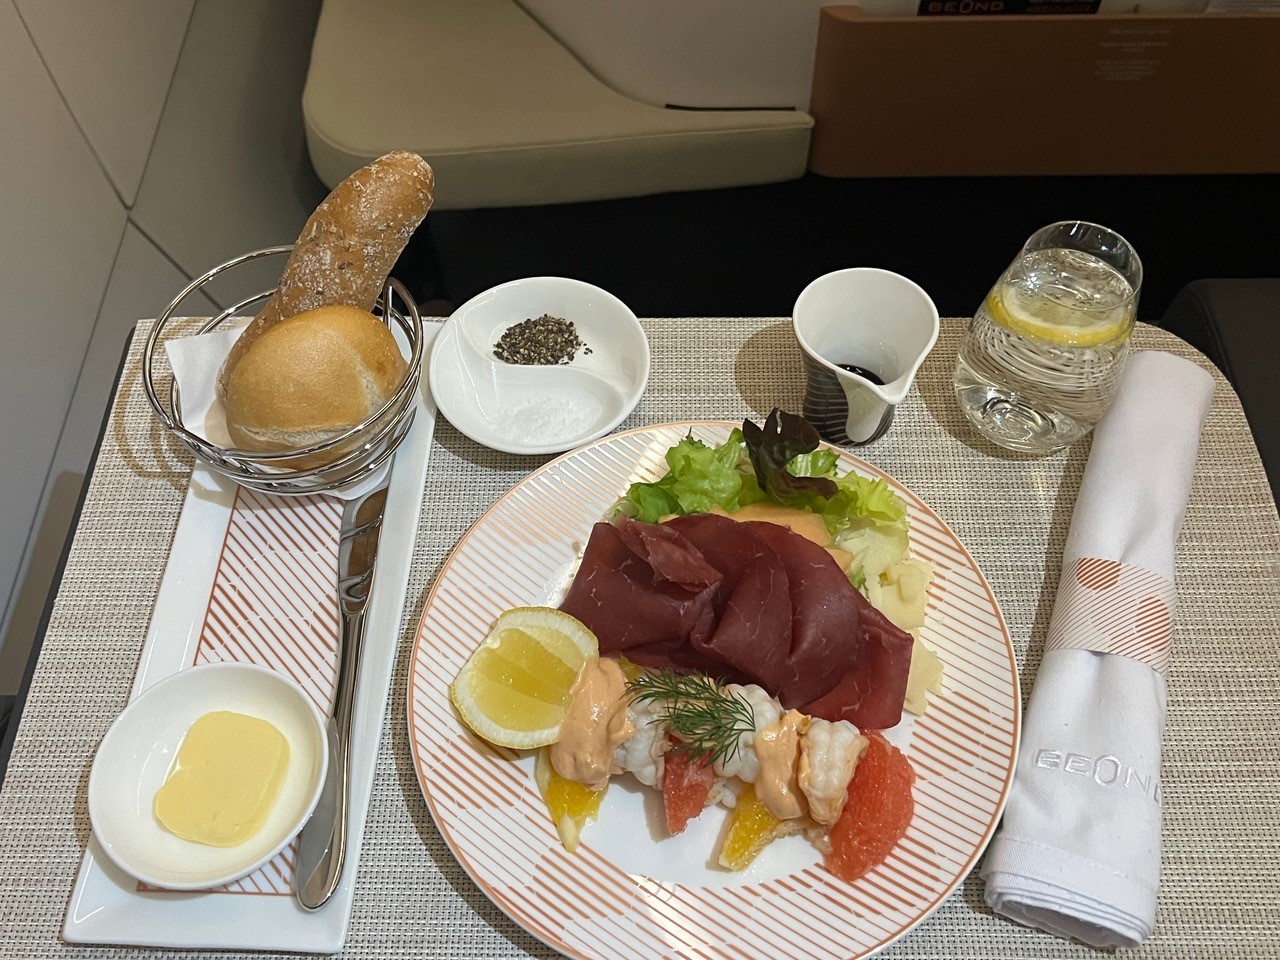 FLIGHT REVIEW: FLYING LUXURY AIRLINES - aviation news